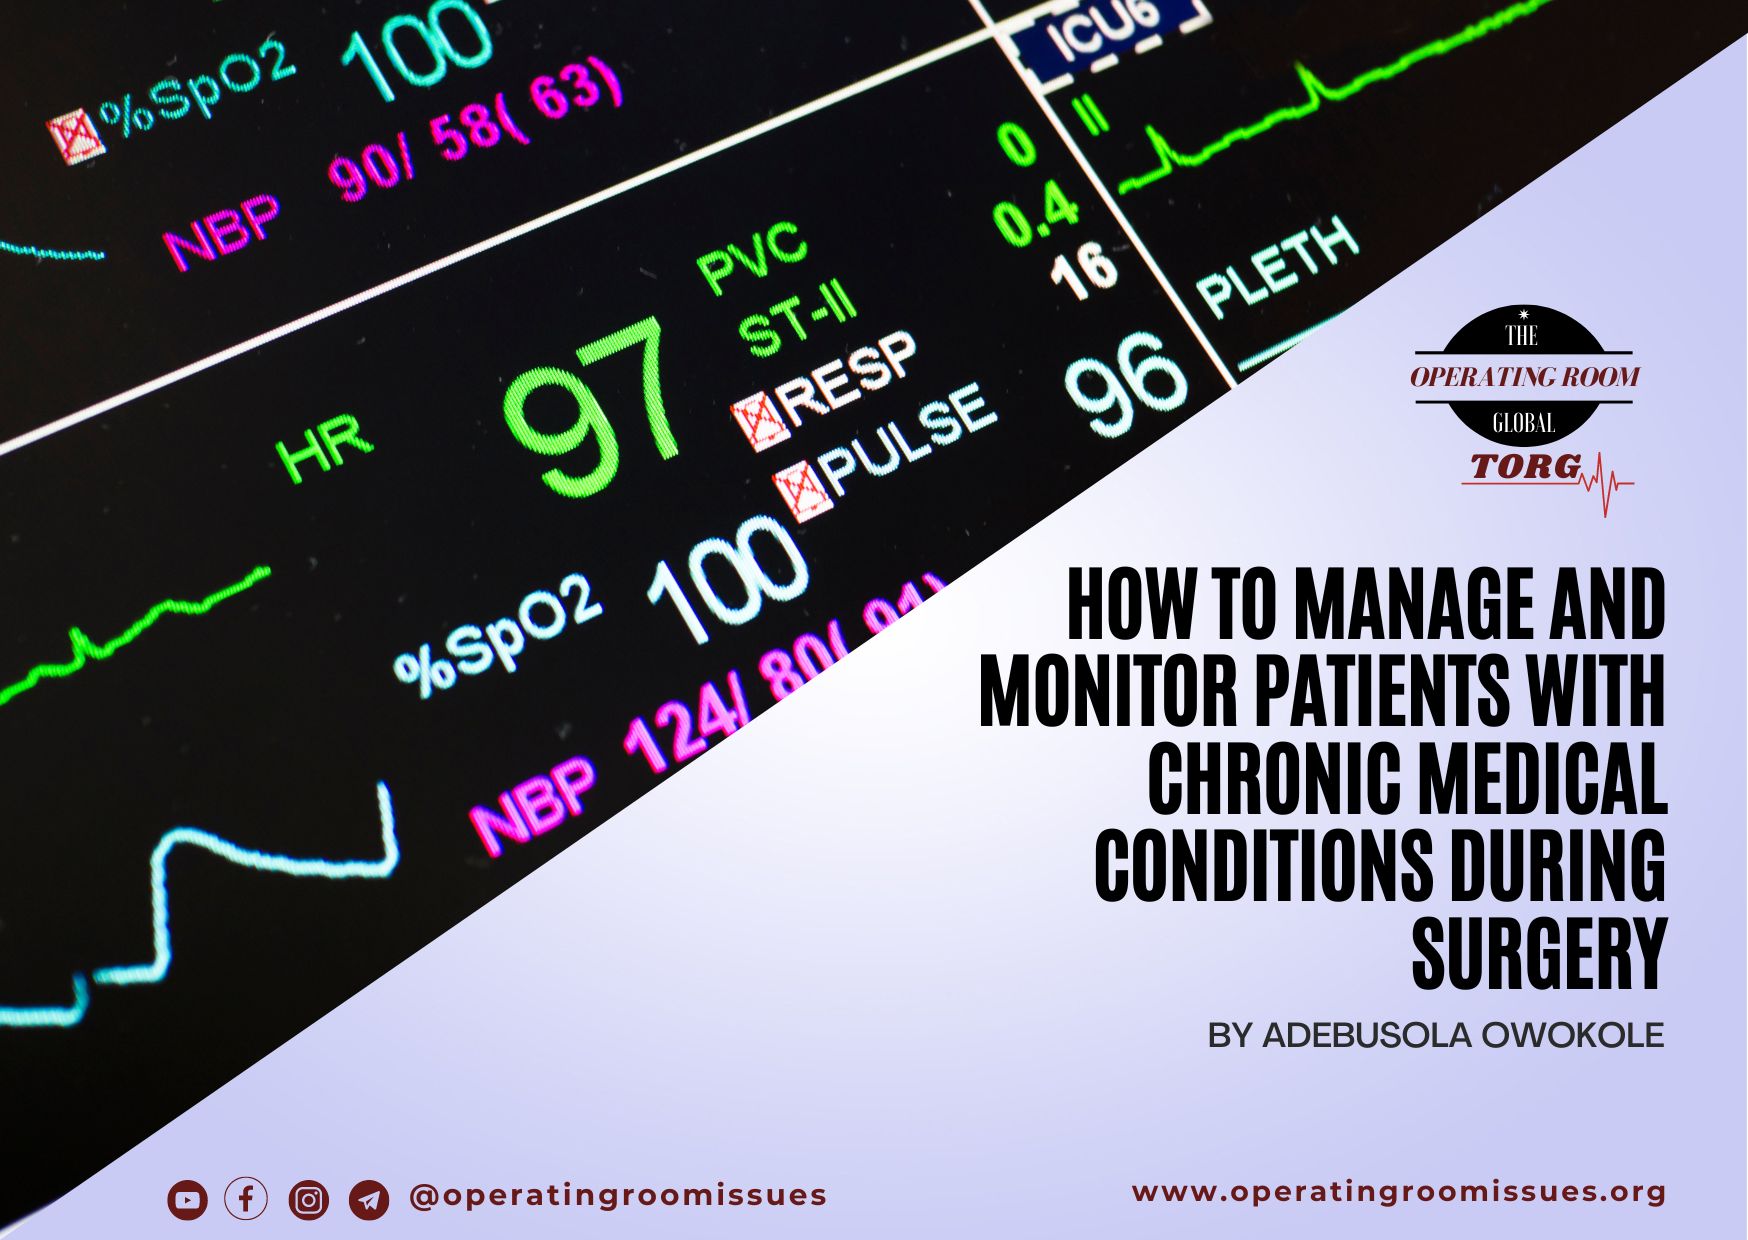 <strong>How to manage and monitor patients with chronic medical conditions during surgery</strong>